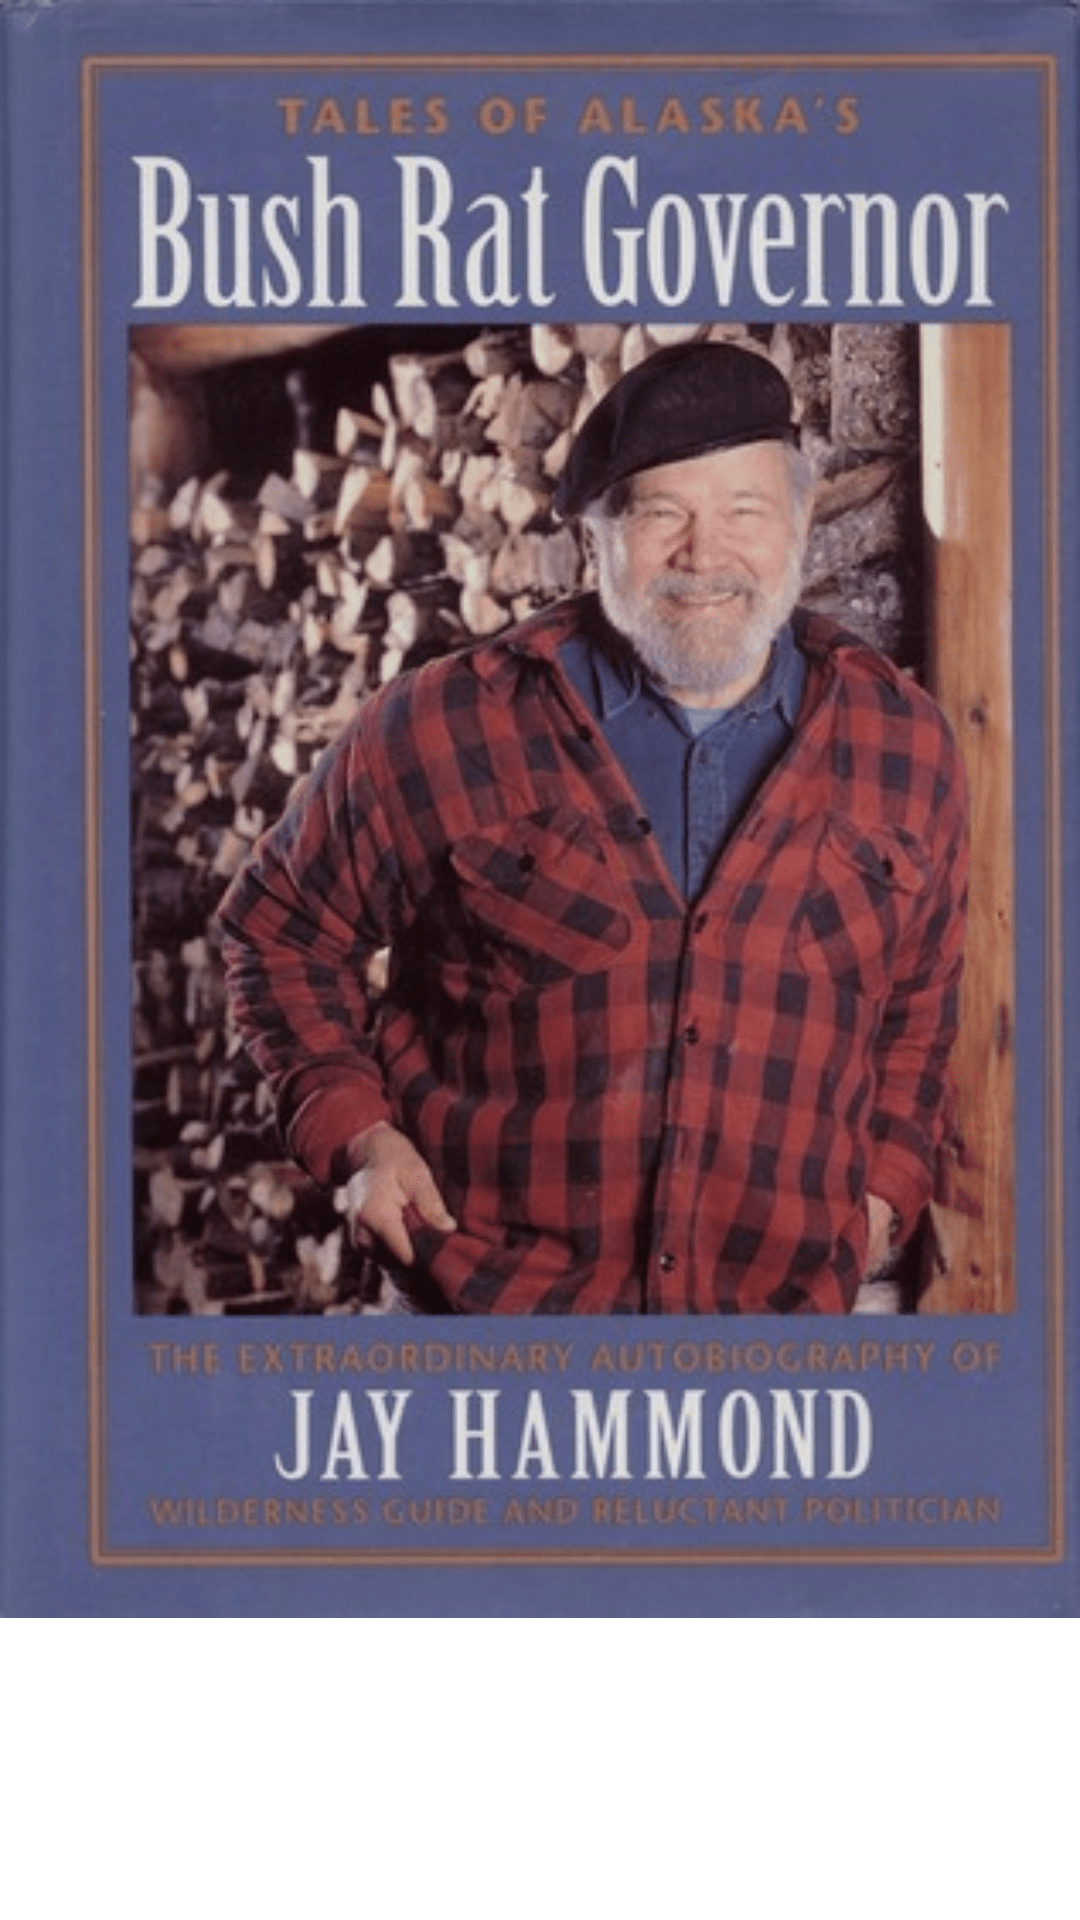 Tales of Alaska's Bush Rat Governor : The Extraordinary Autobiography of Jay Hammond, Wilderness Guide and Reluctant Politician